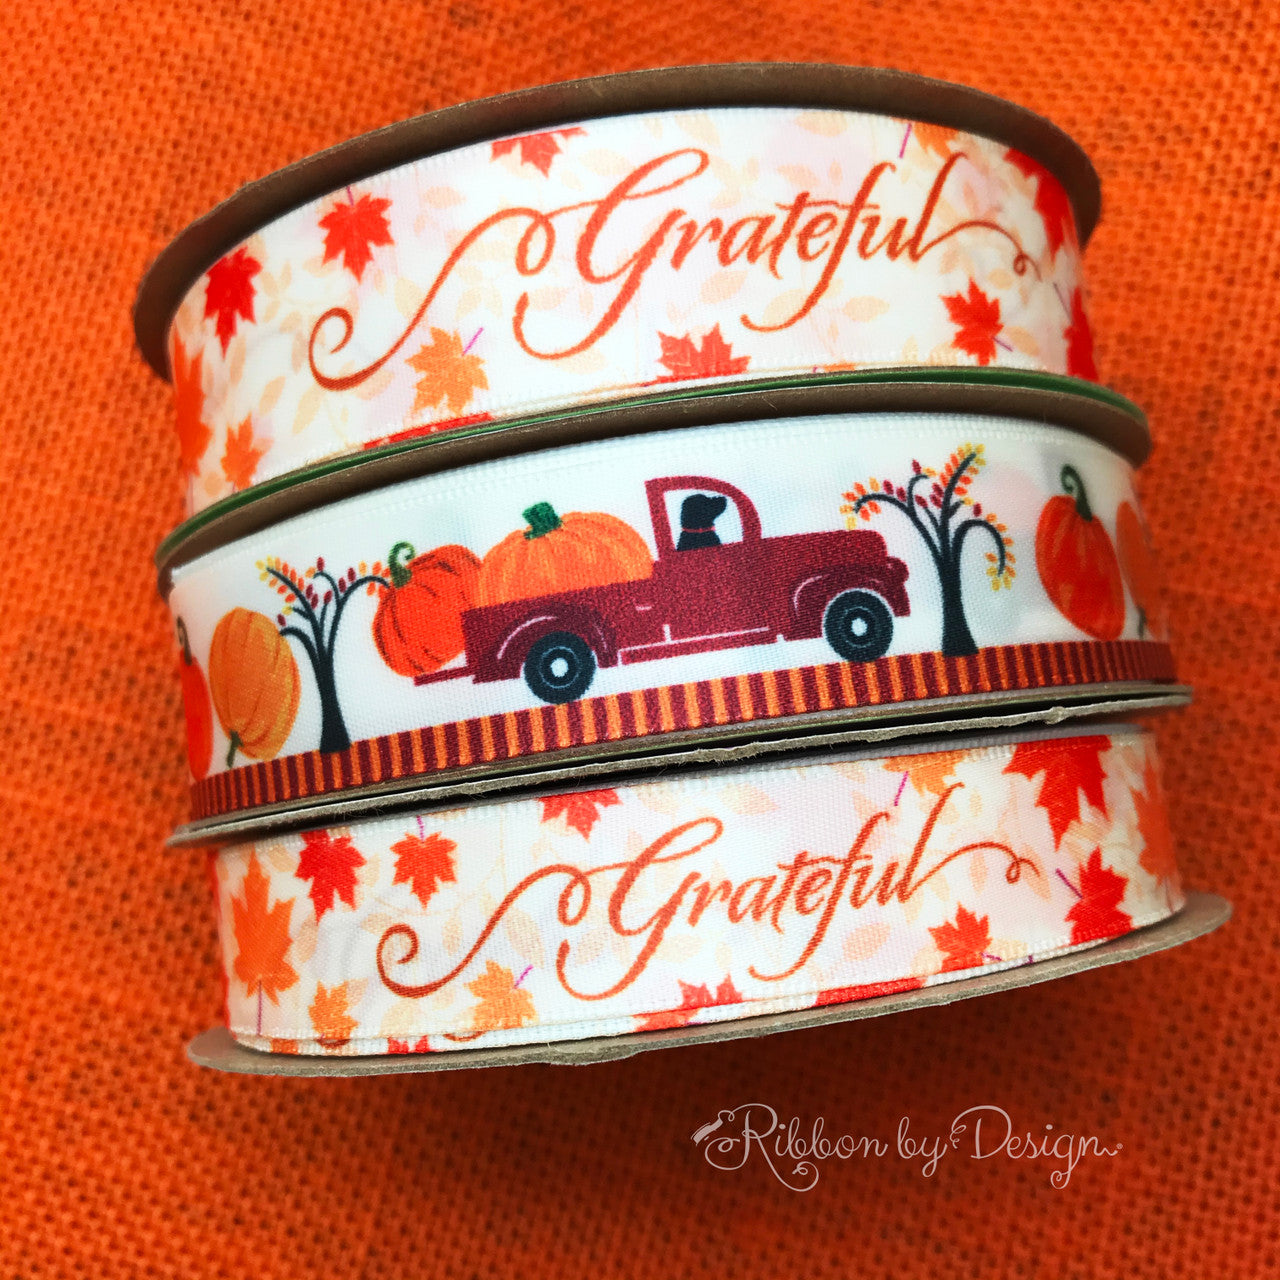 Mix and match our Grateful ribbon with our Fall pumpkin truck! This fun combination is perfect for all those Fall and Thanksgiving gifts and craft projects!